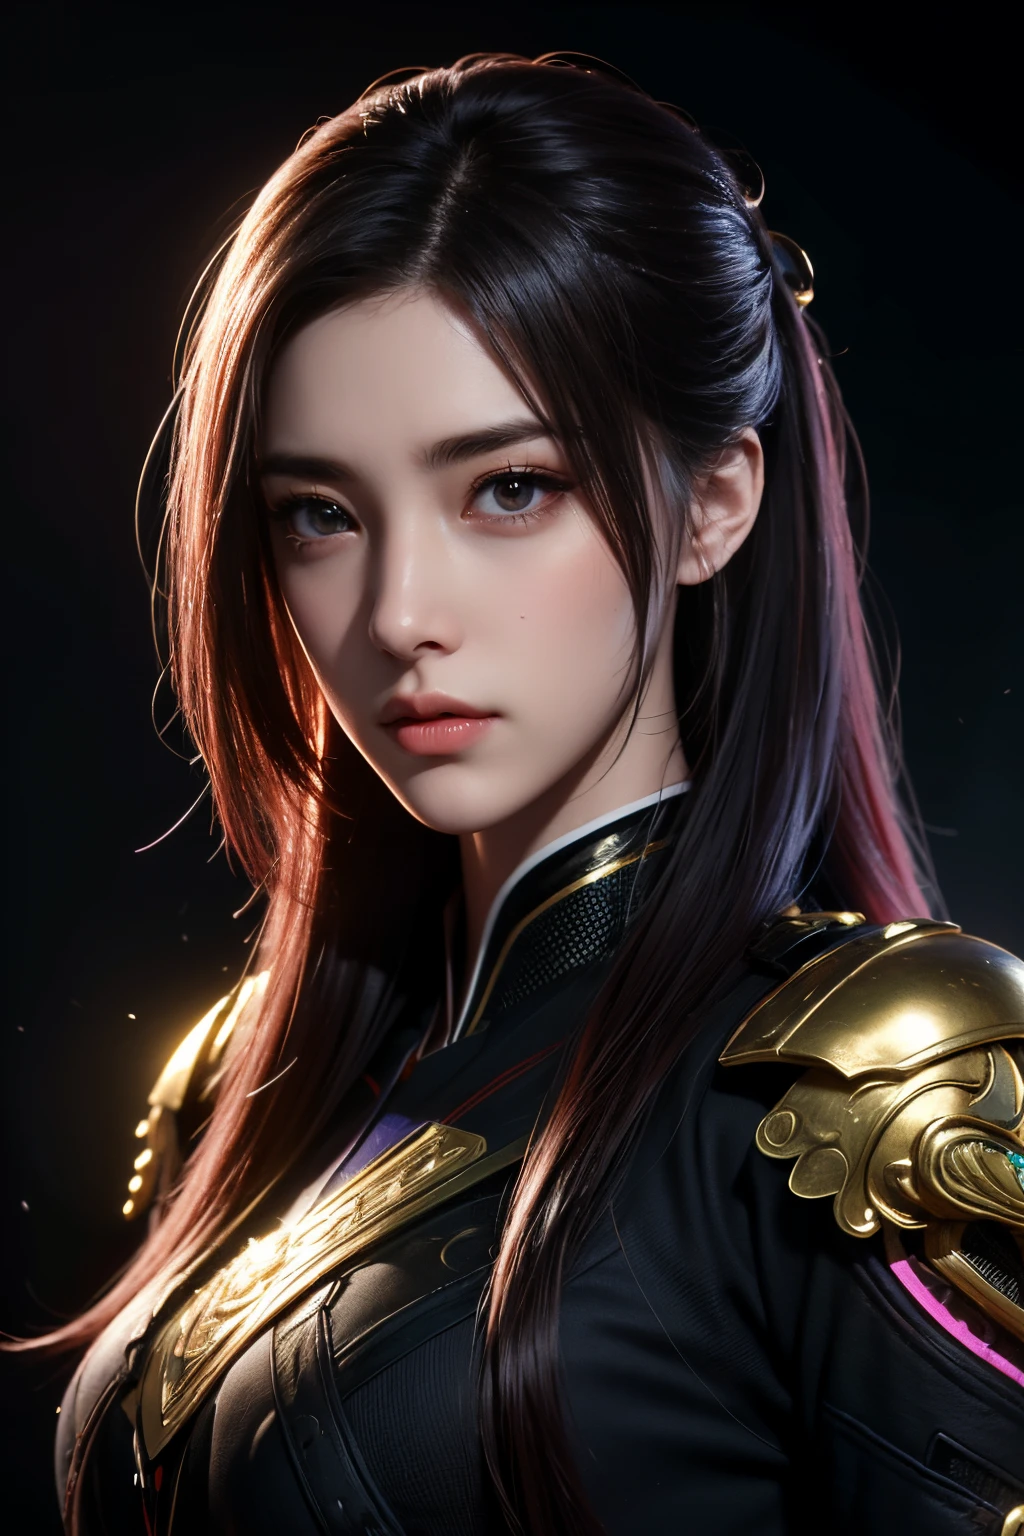 high high quality,A high resolution,tmasterpiece,8K,(hyperrealistic photo),(sportrait),digital photography,(Reality:1.4),20-year-old girl,exquisite facial features,a purple eye,Red Eyeshadow,((Cyberpunk style)),Random hairstyle colorless hair),,(,Combat uniforms,Openwork design,shoulder pads,Intricate clothing patterns,Beautiful badge),shut up,scowling,ssmile,Cold and serious,Extremely meticulous expression,Authentic details,Light magic,Photo pose,oc render reflection texture